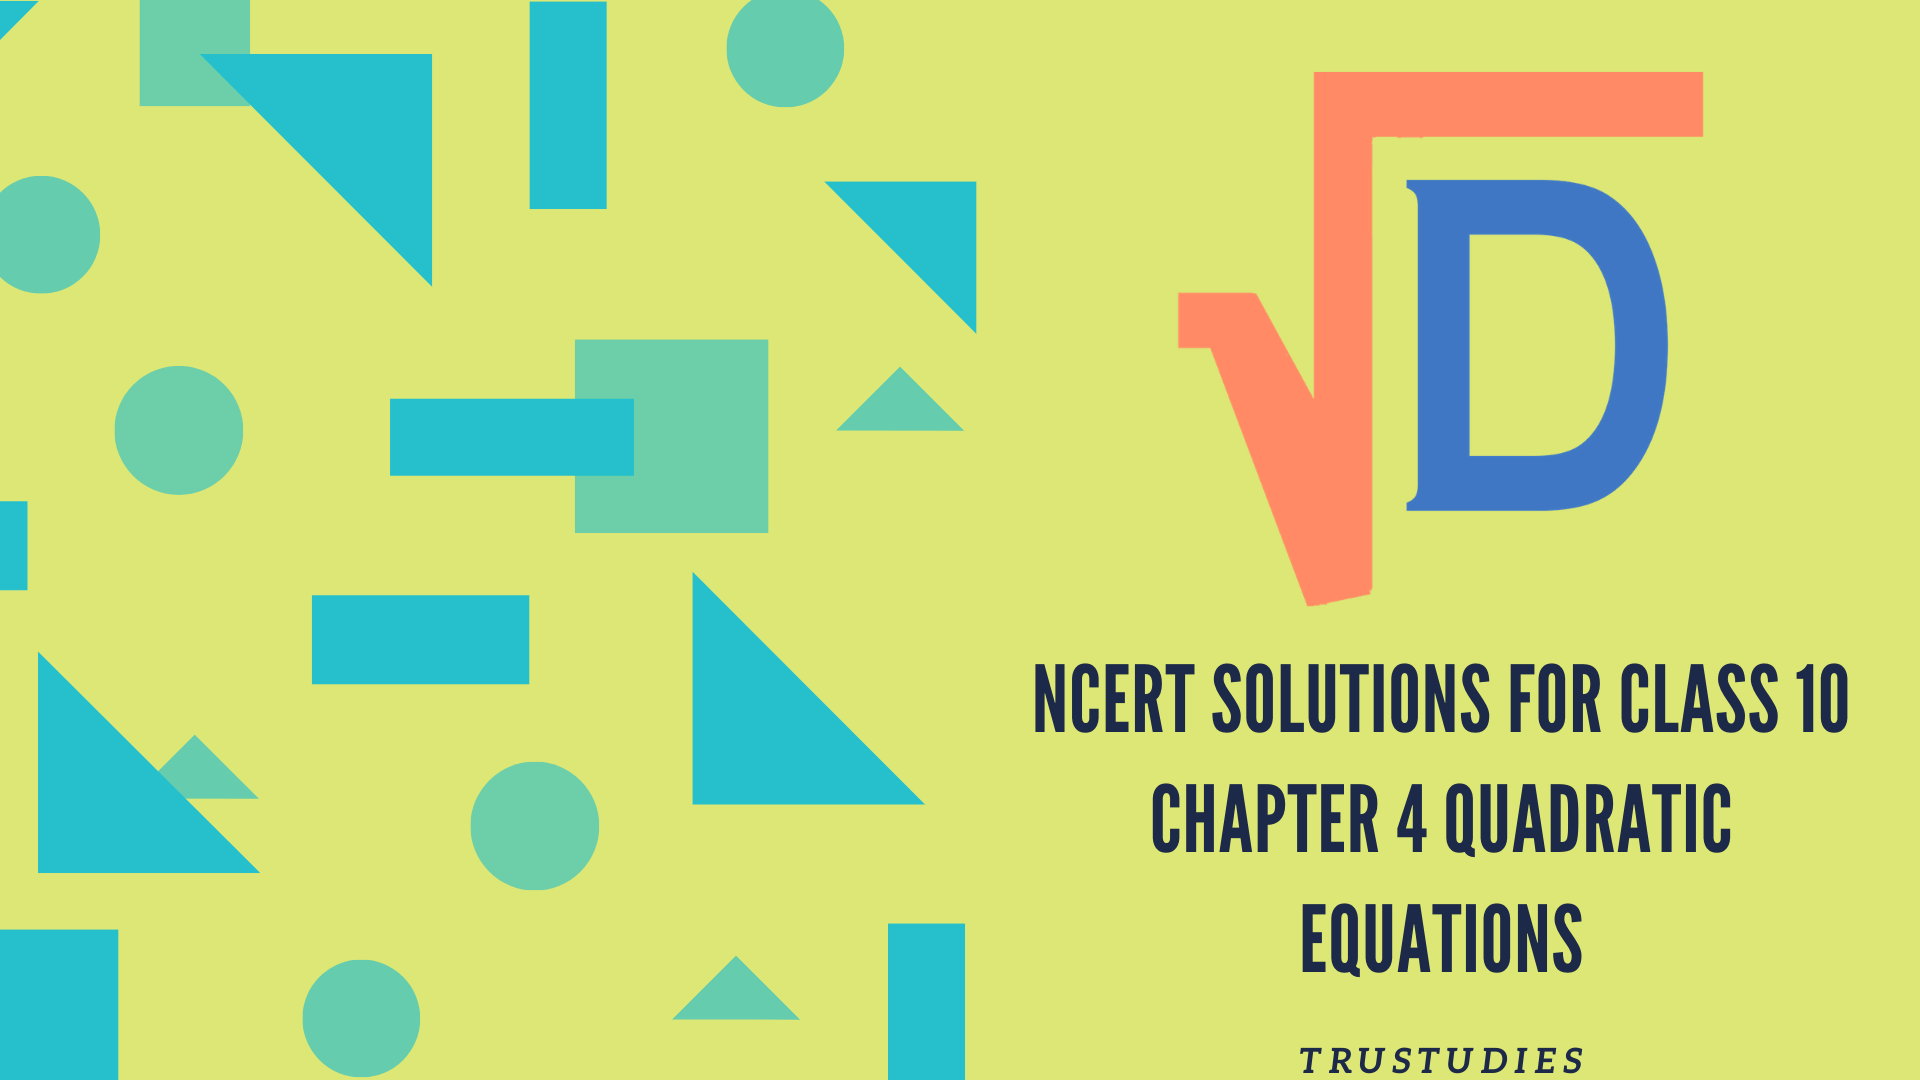 NCERT solutions for class 10 maths chapter 4 quadratic equations banner image